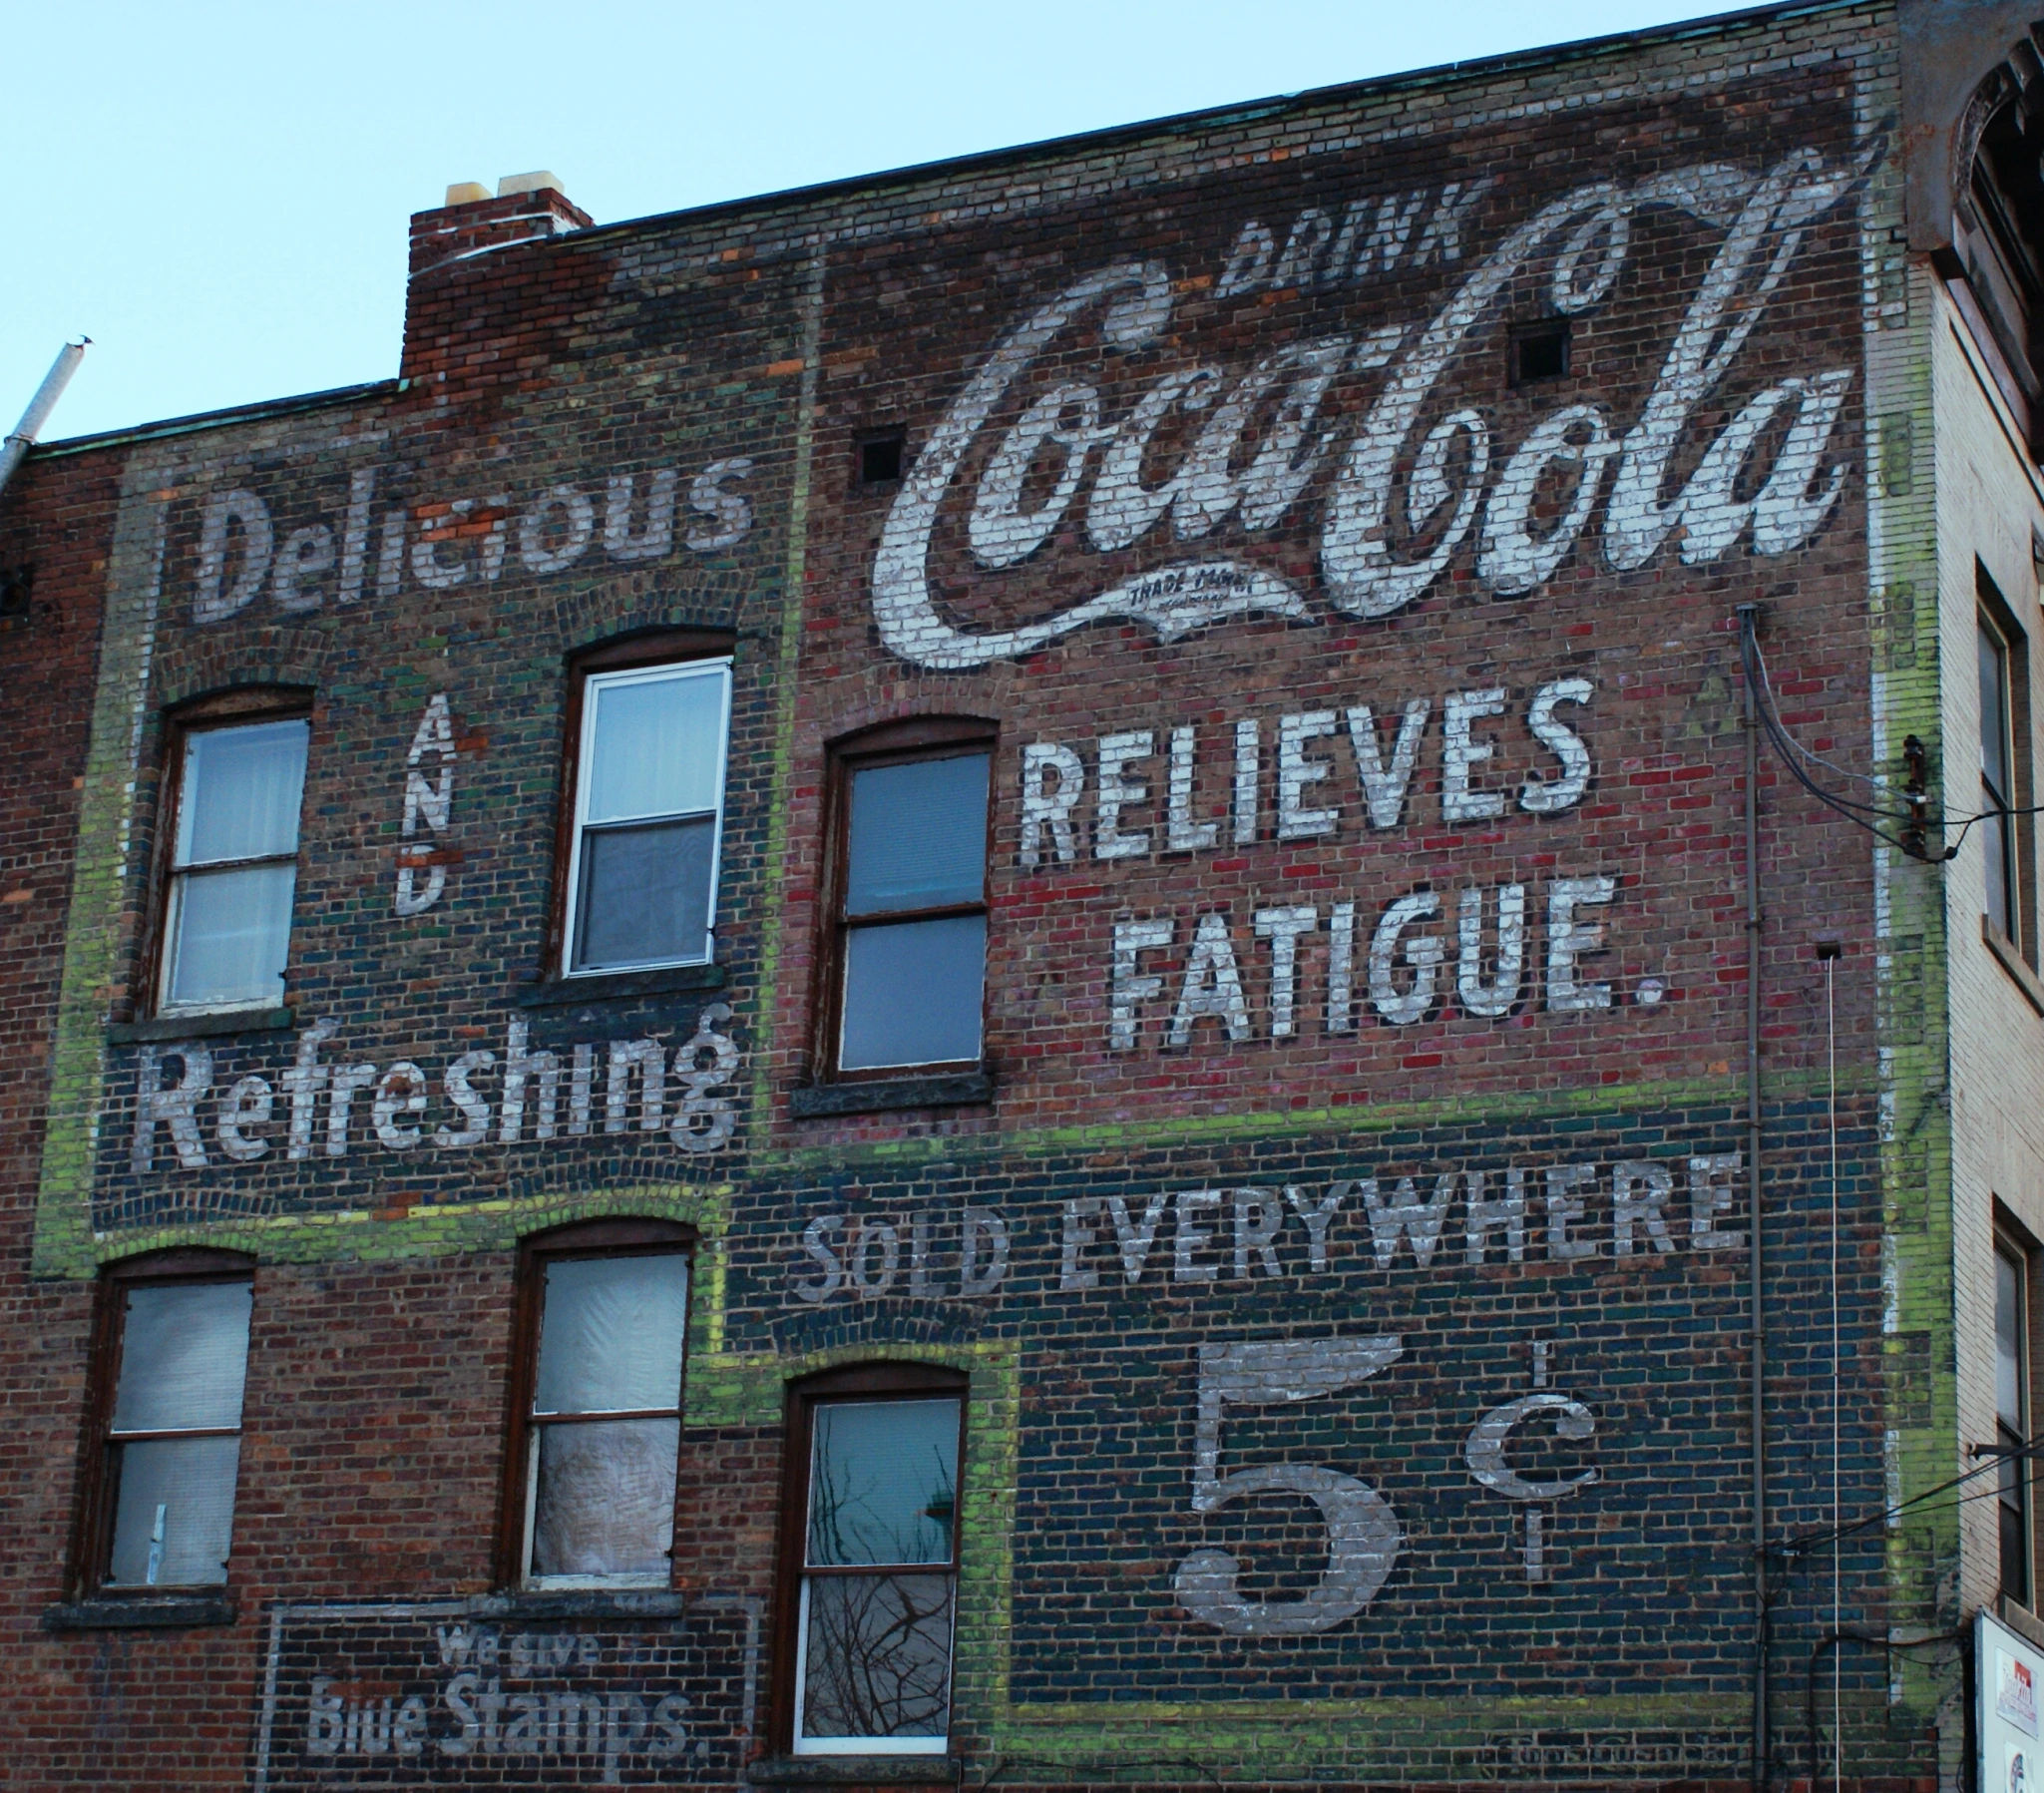 an old building has signs painted on the side